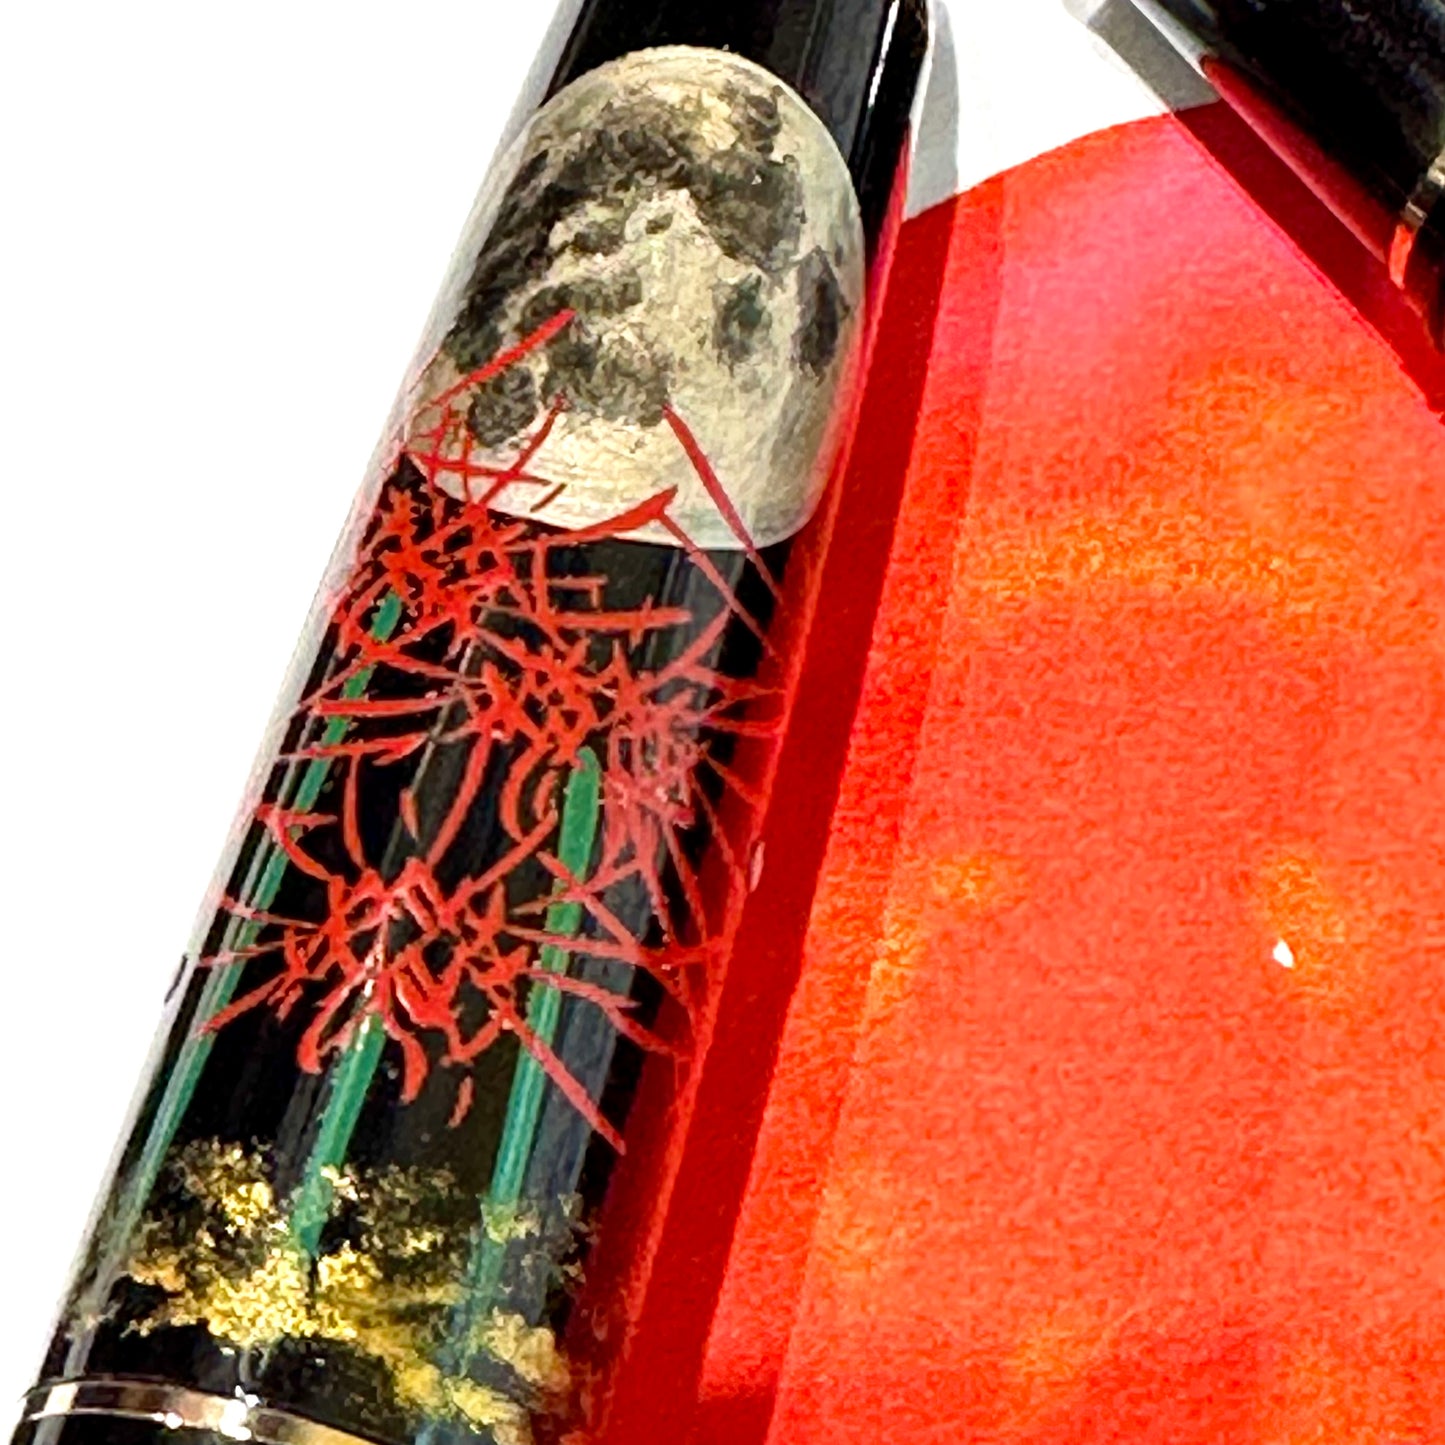 BUNGUBOX x SAILOR Wajima Makie Fountain Pen "Red Spider Lily in the Moonlit Night"